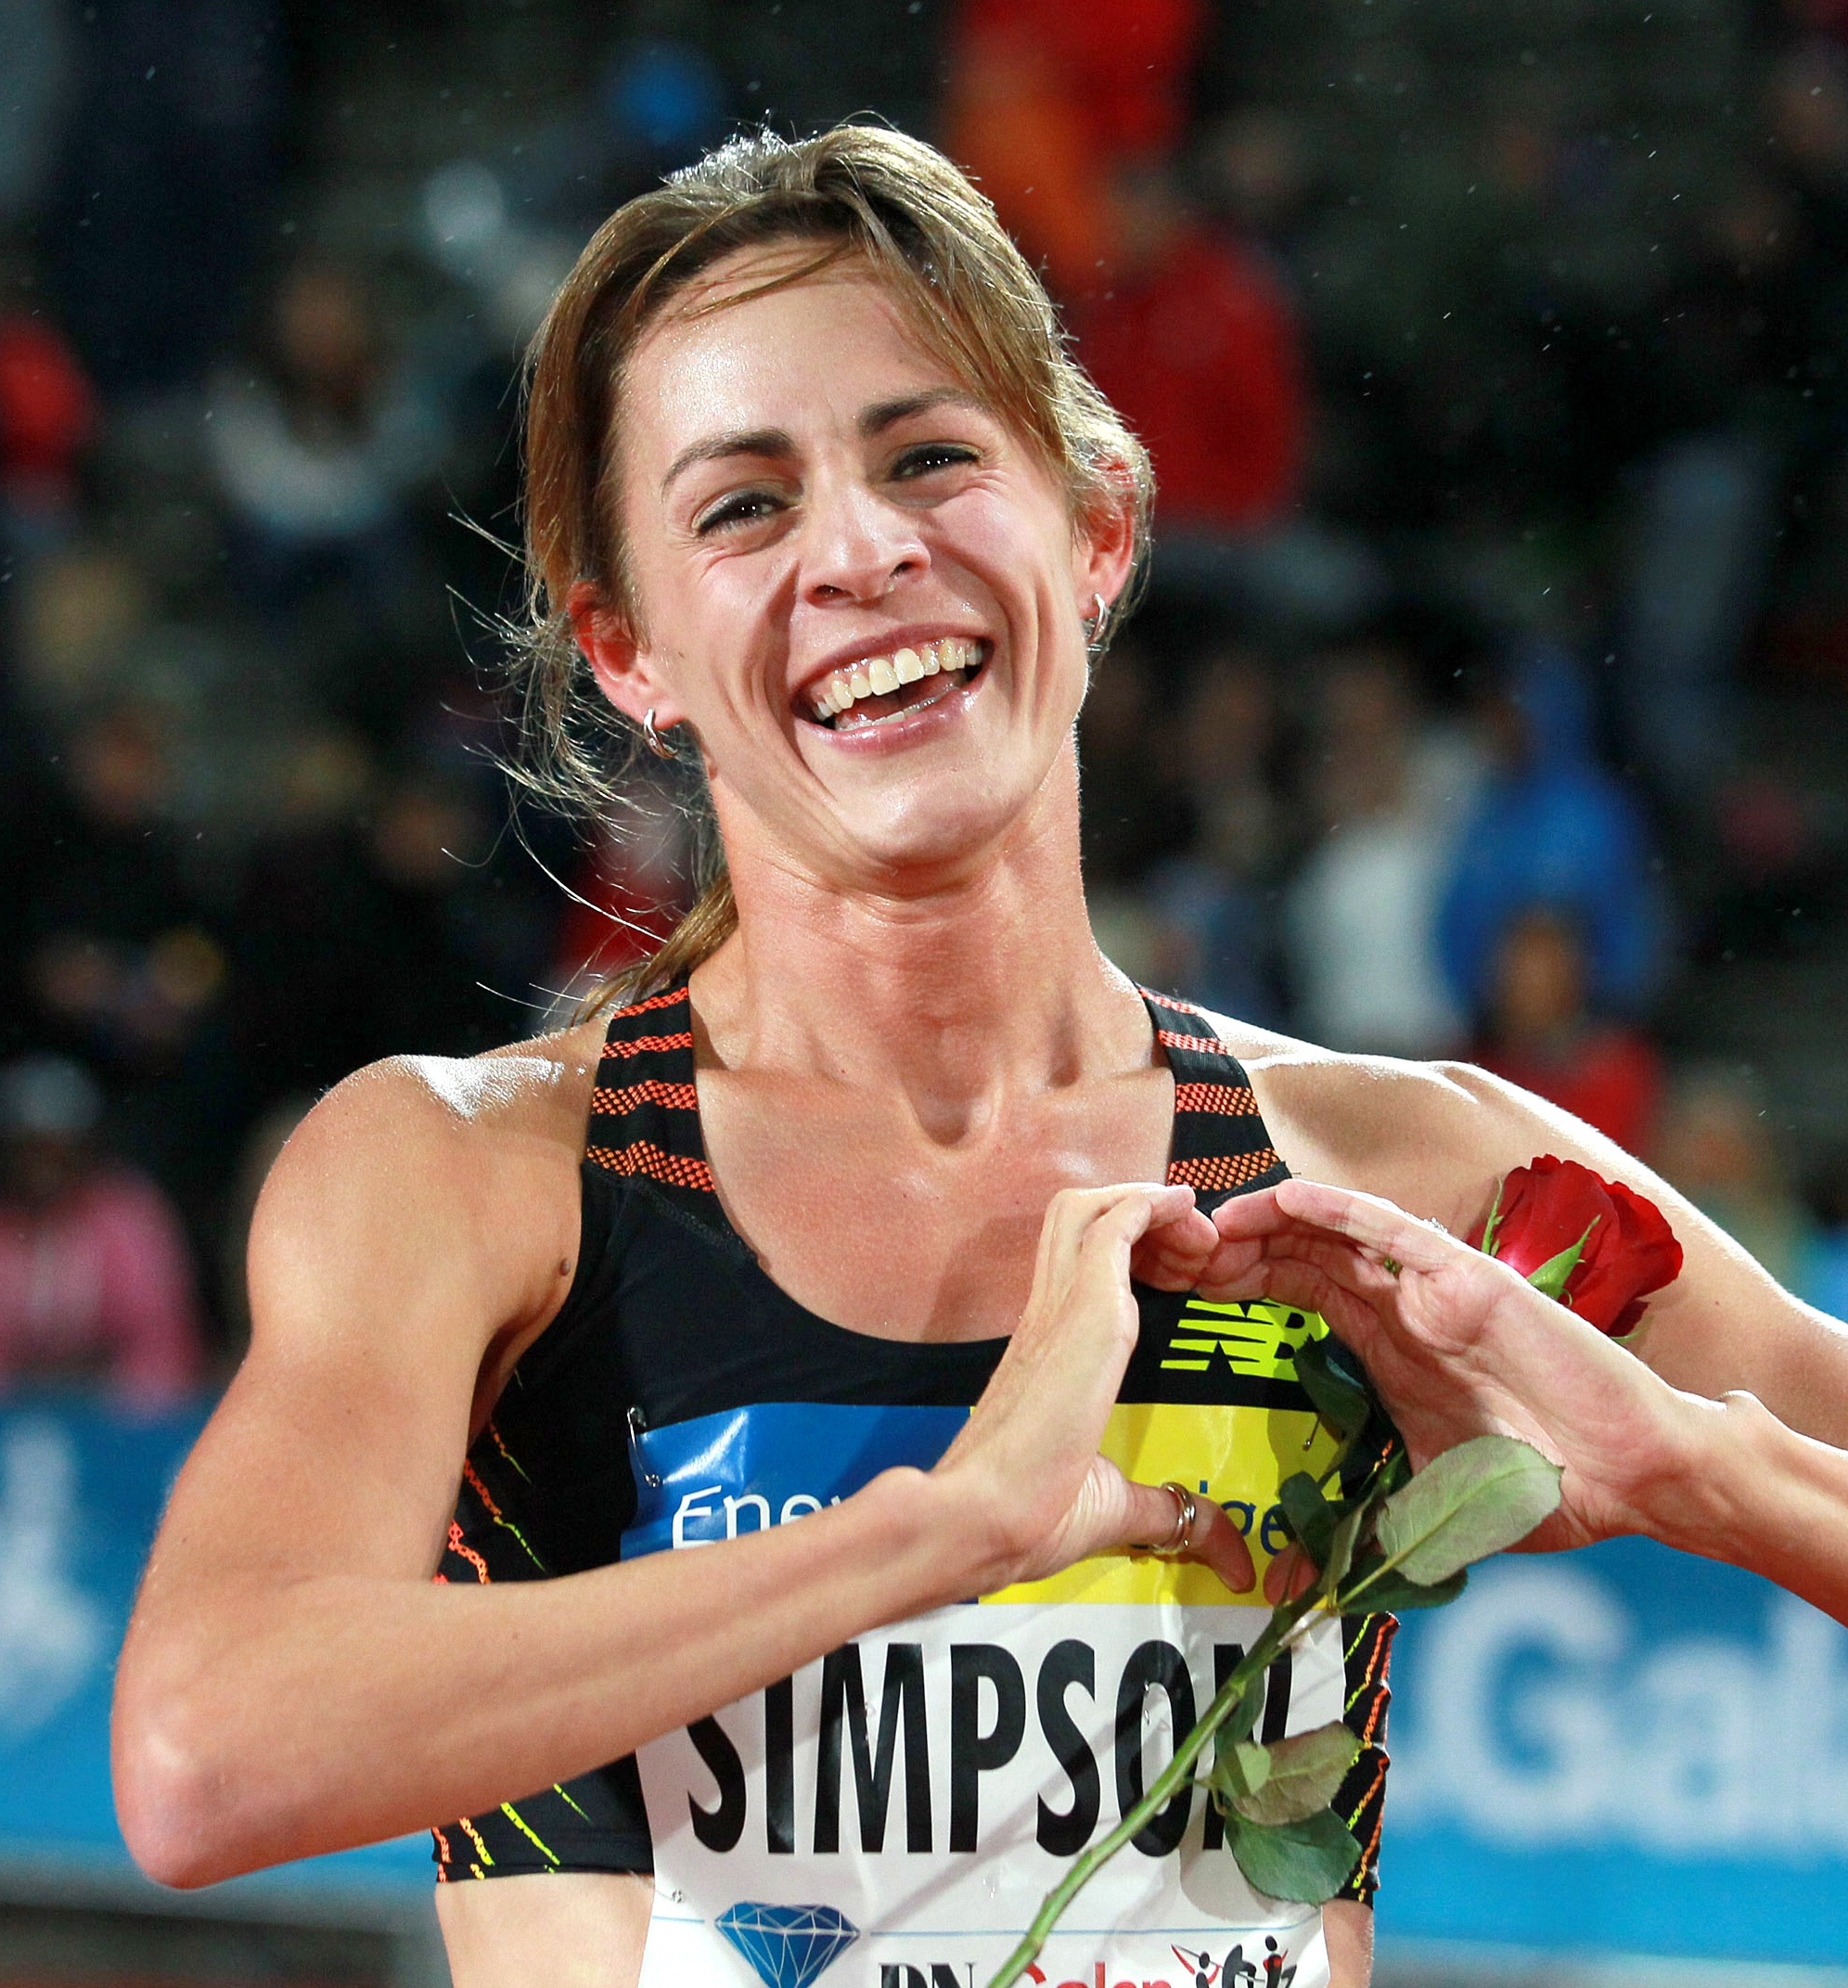 Jenny Simpson: It’s good to be Queen : News : Bring Back the Mile1992 x 2143